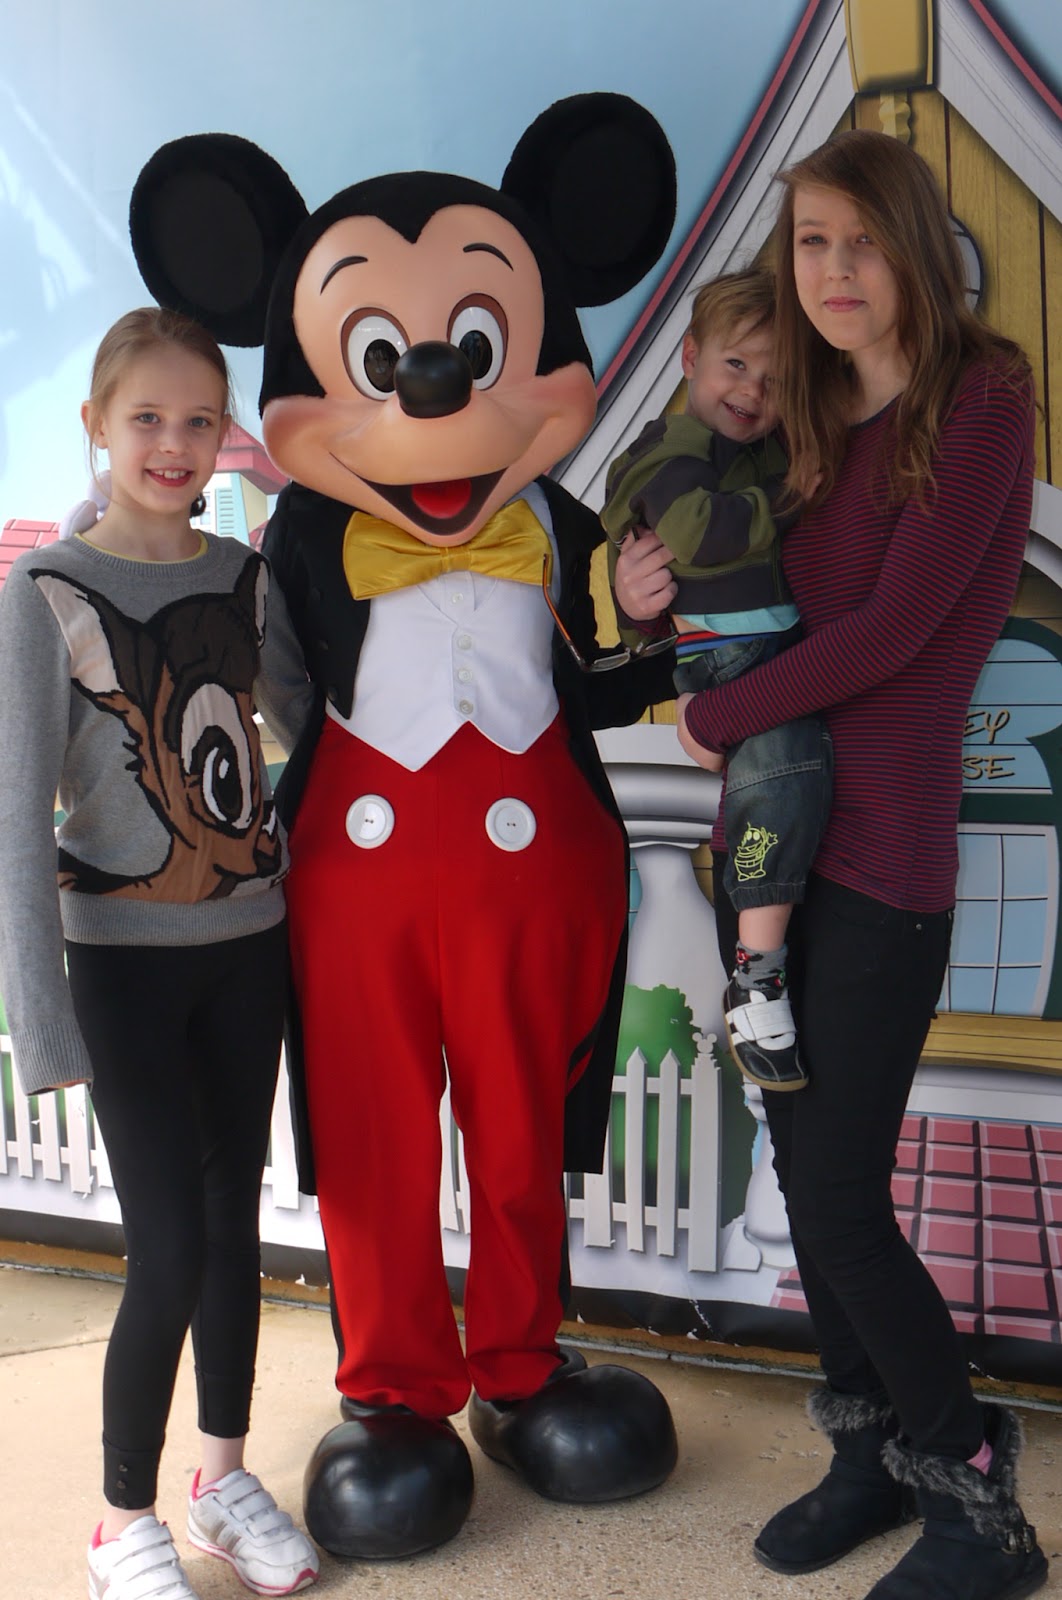 Inside the Wendy House: Meeting Mickey Mouse #Project 52